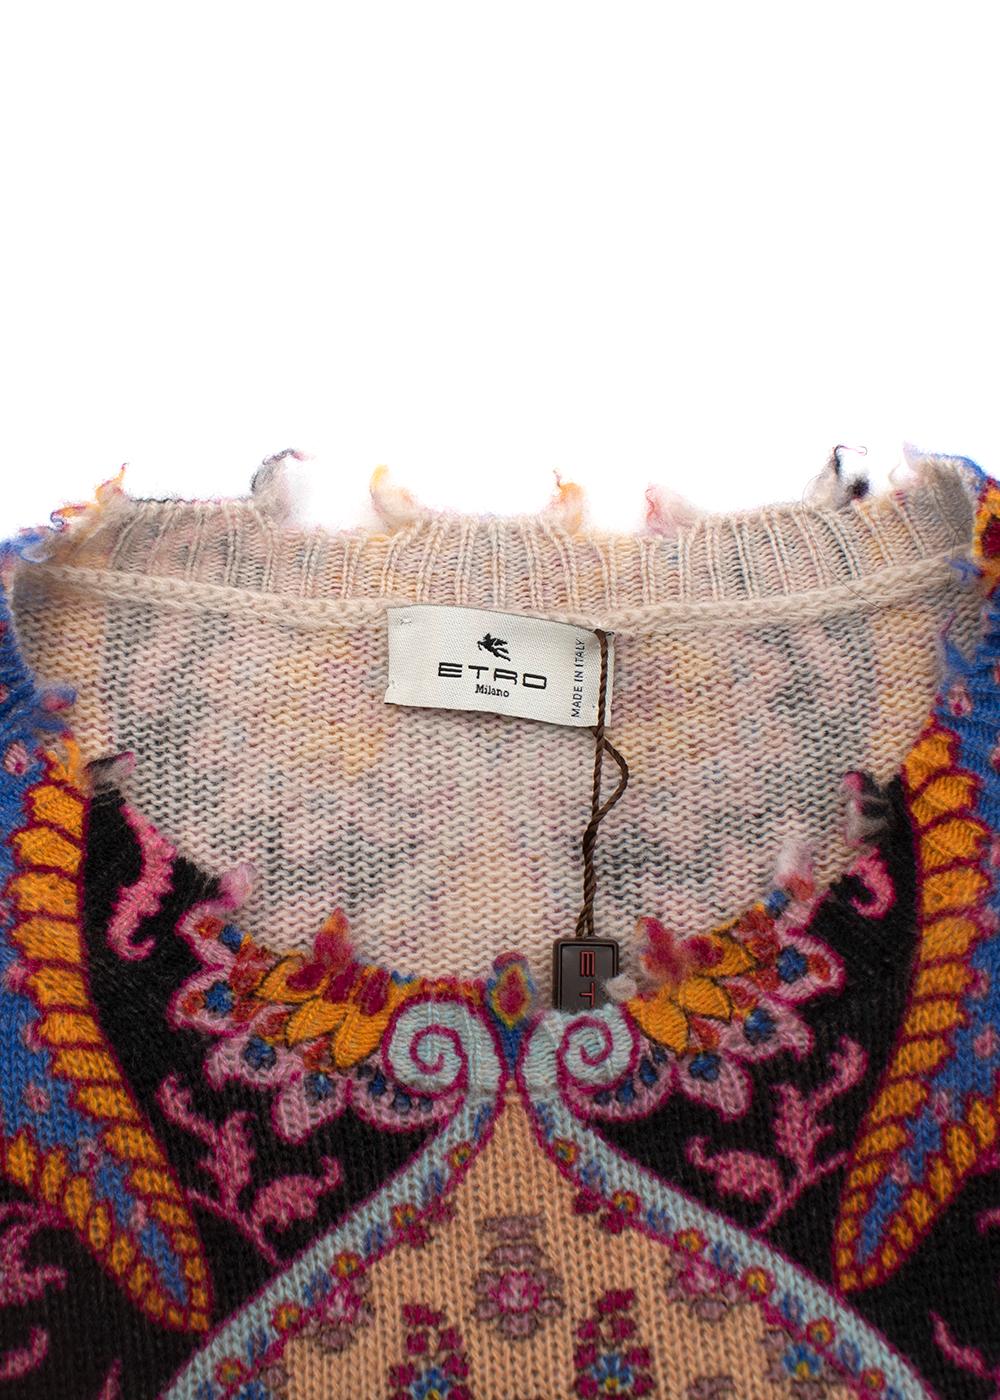 Paisley Print Distressed Fine Knit Jumper In Excellent Condition For Sale In London, GB